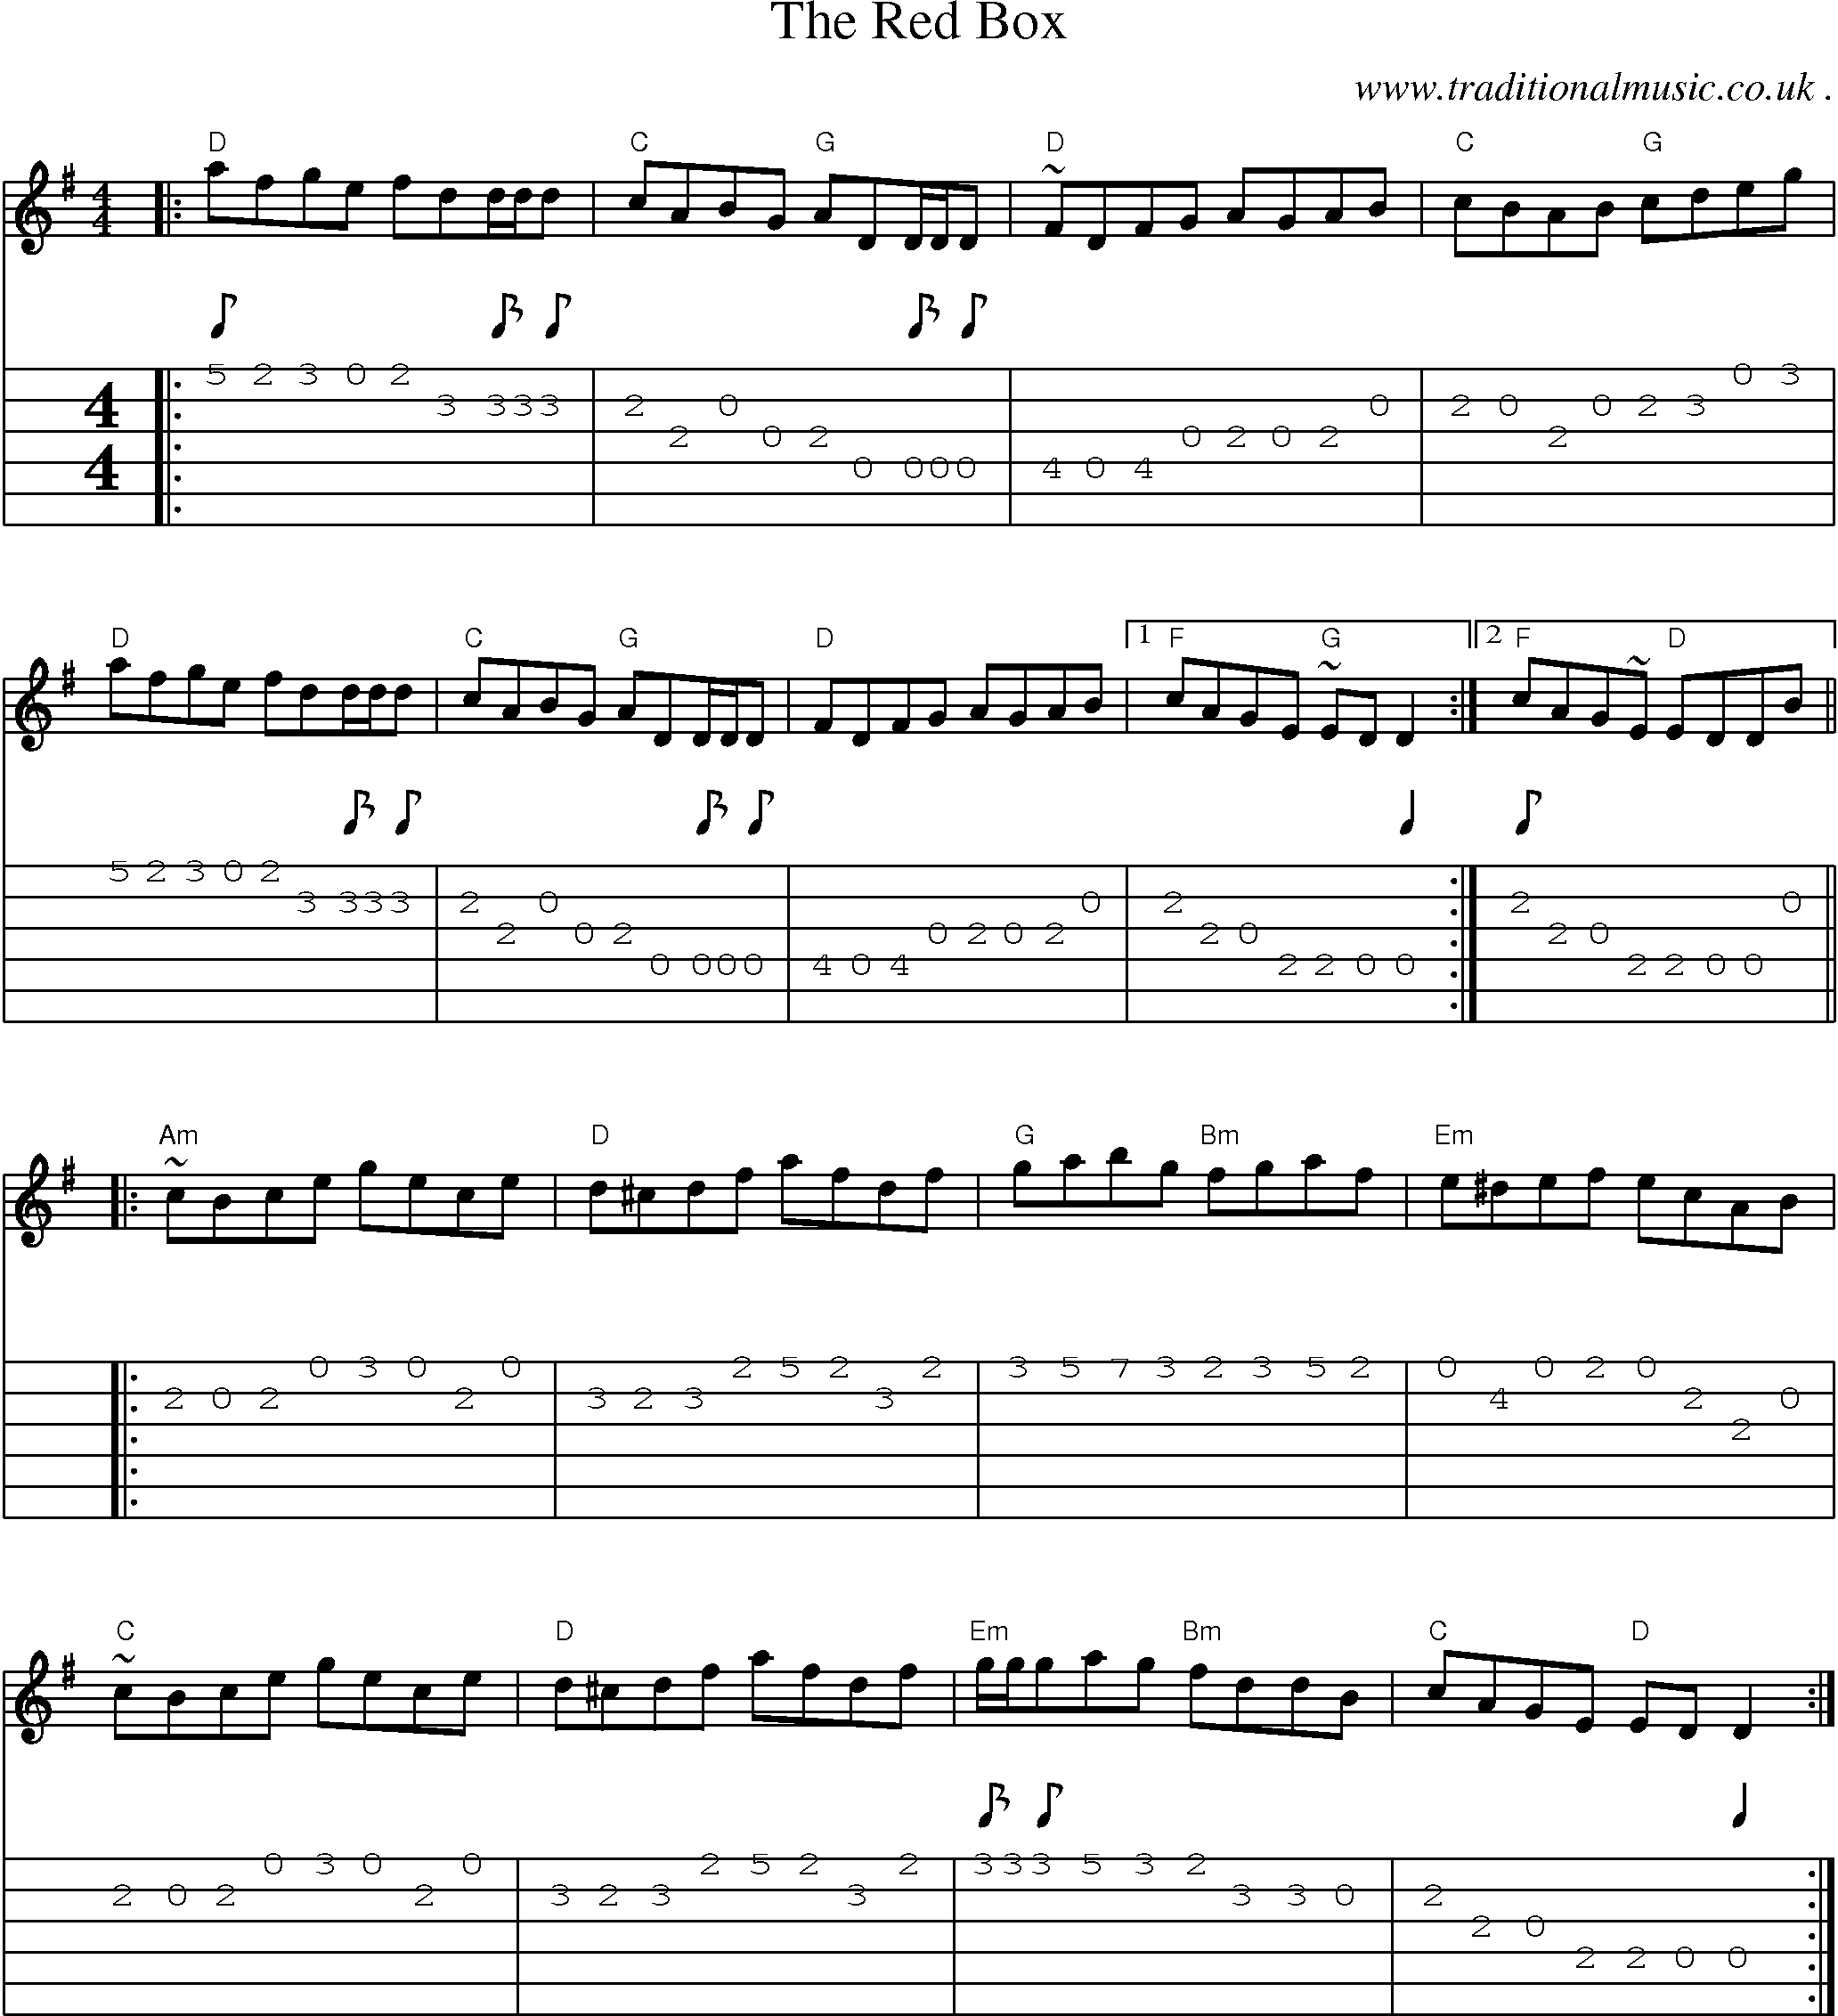 Music Score and Guitar Tabs for The Red Box